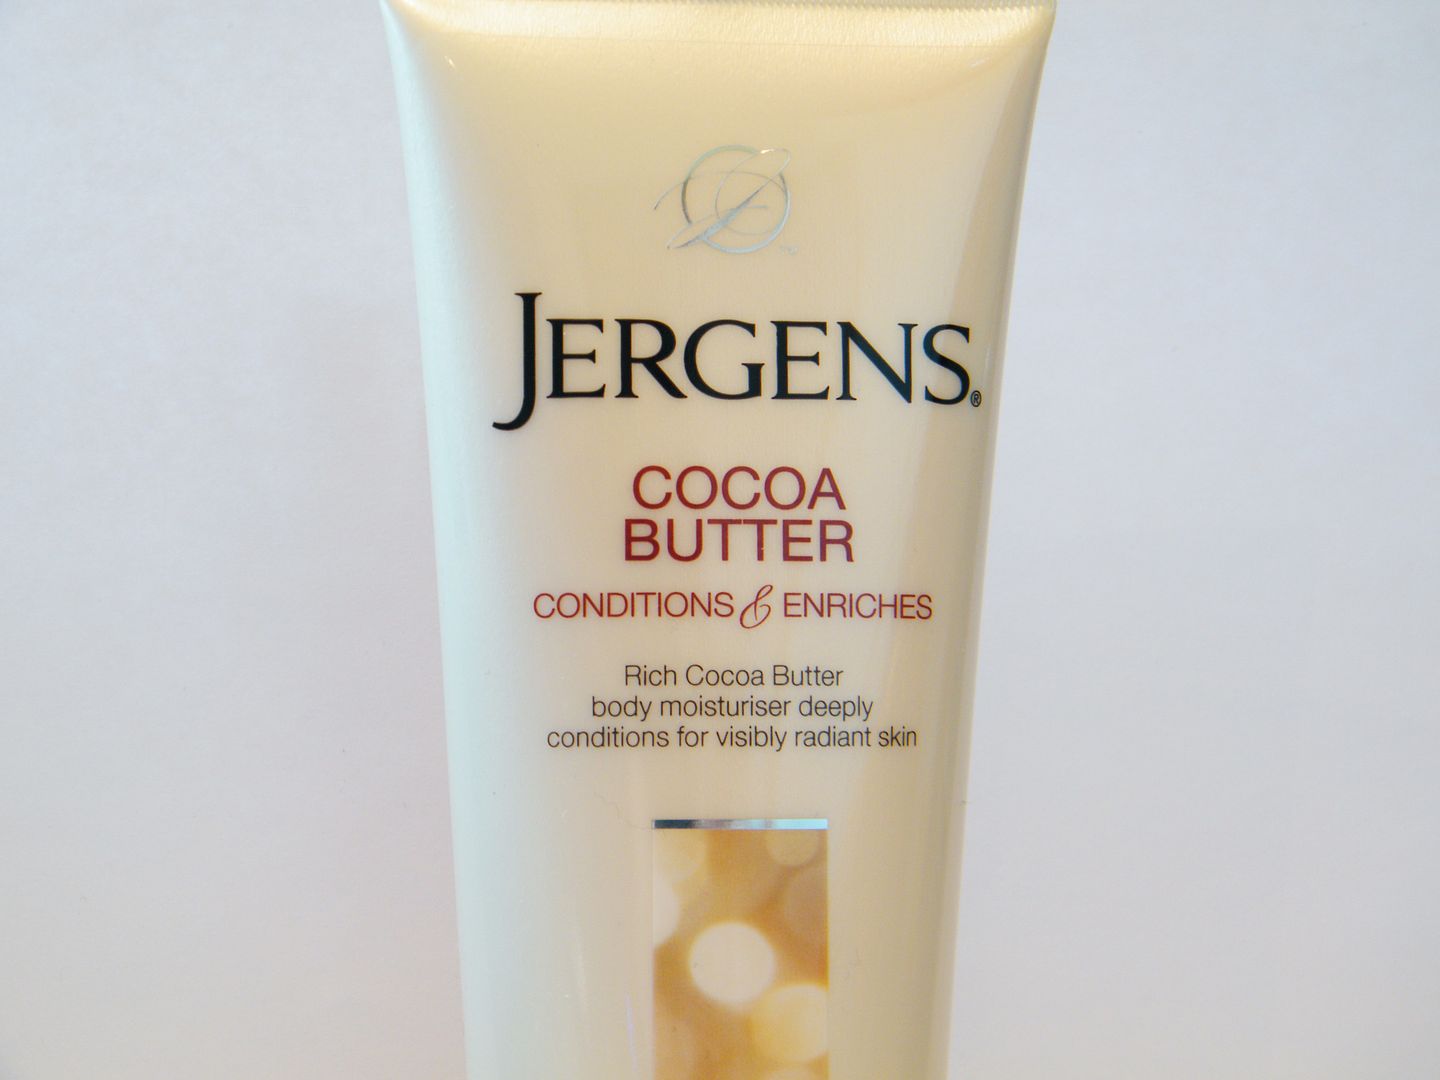 Jergens Cocoa Butter